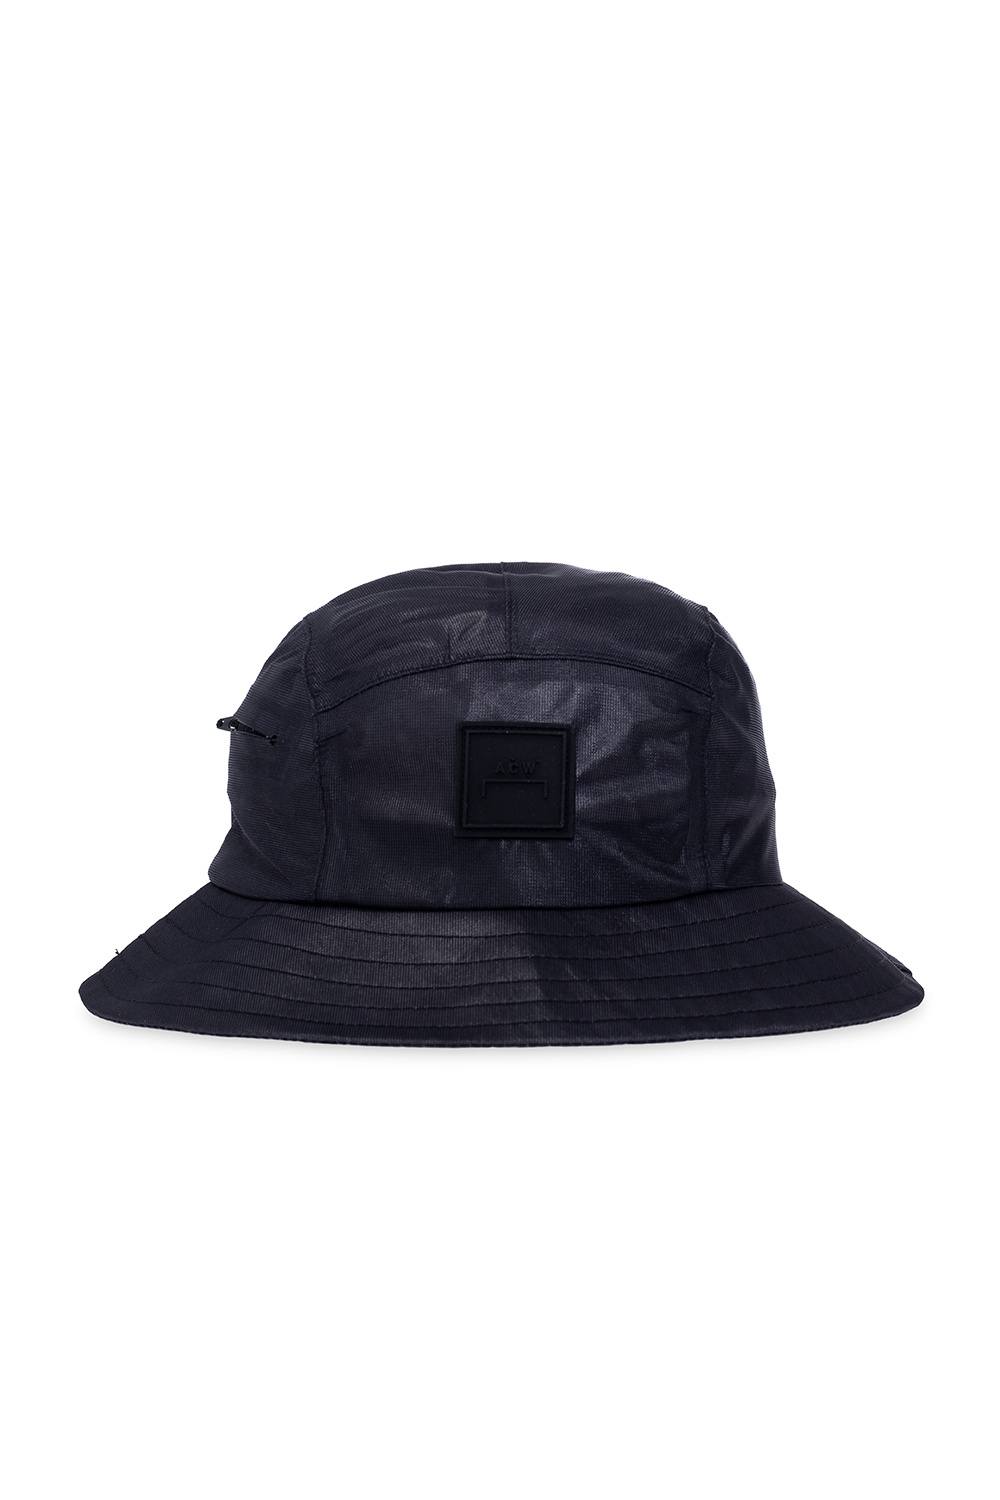 A-COLD-WALL* Bucket hat stock with logo